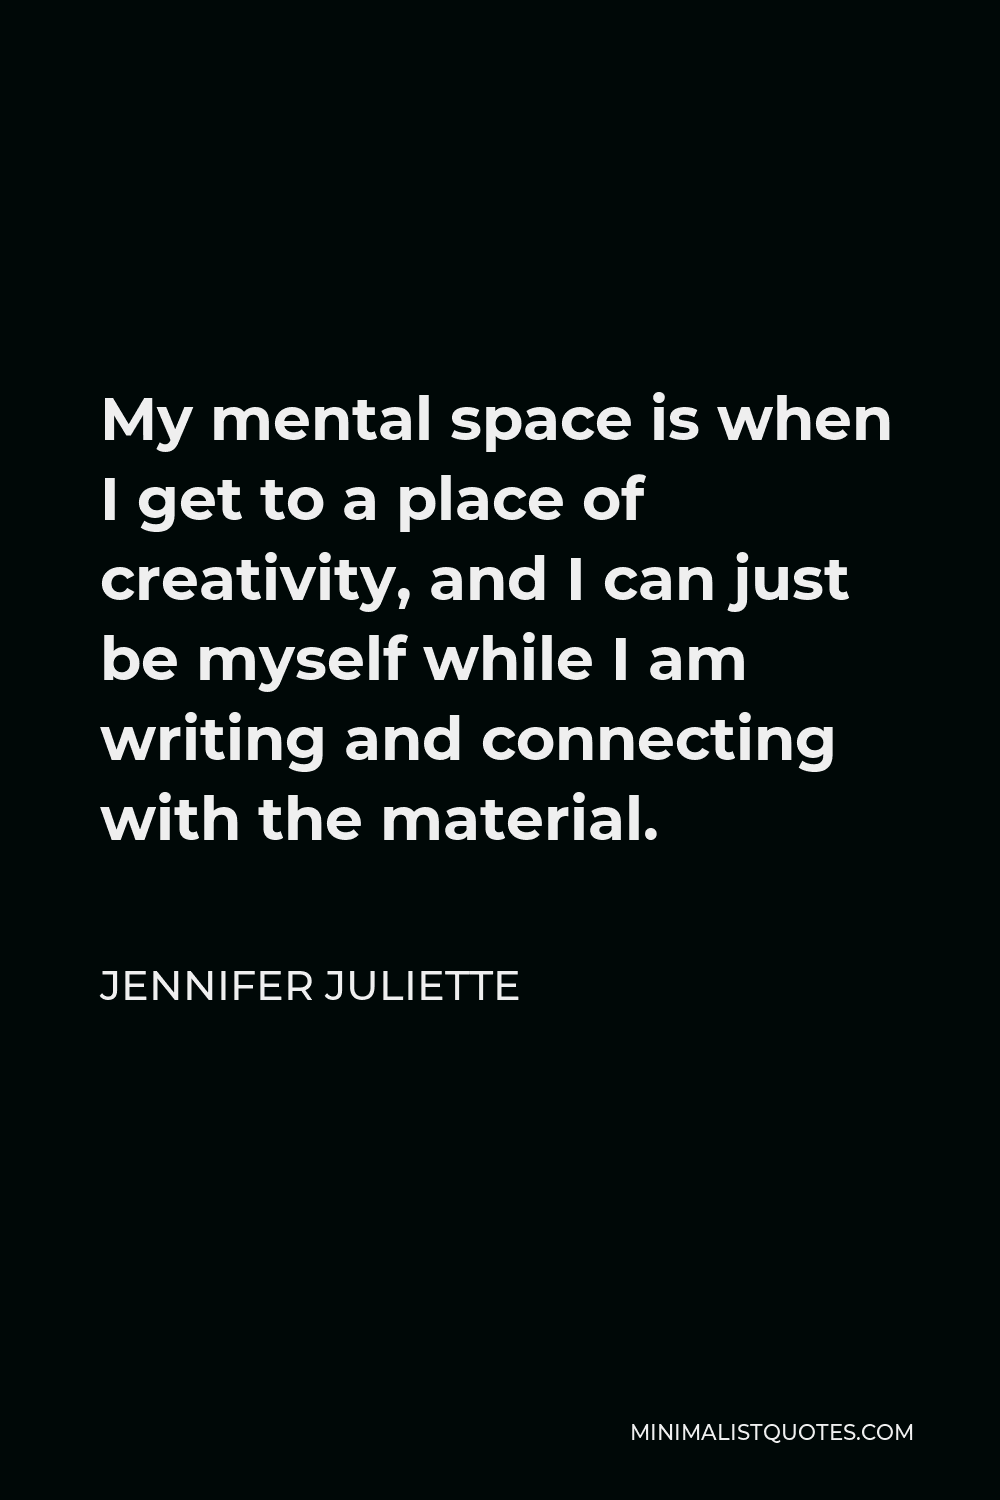 Jennifer Juliette Quote - My mental space is when I get to a place of creativity, and I can just be myself while I am writing and connecting with the material.